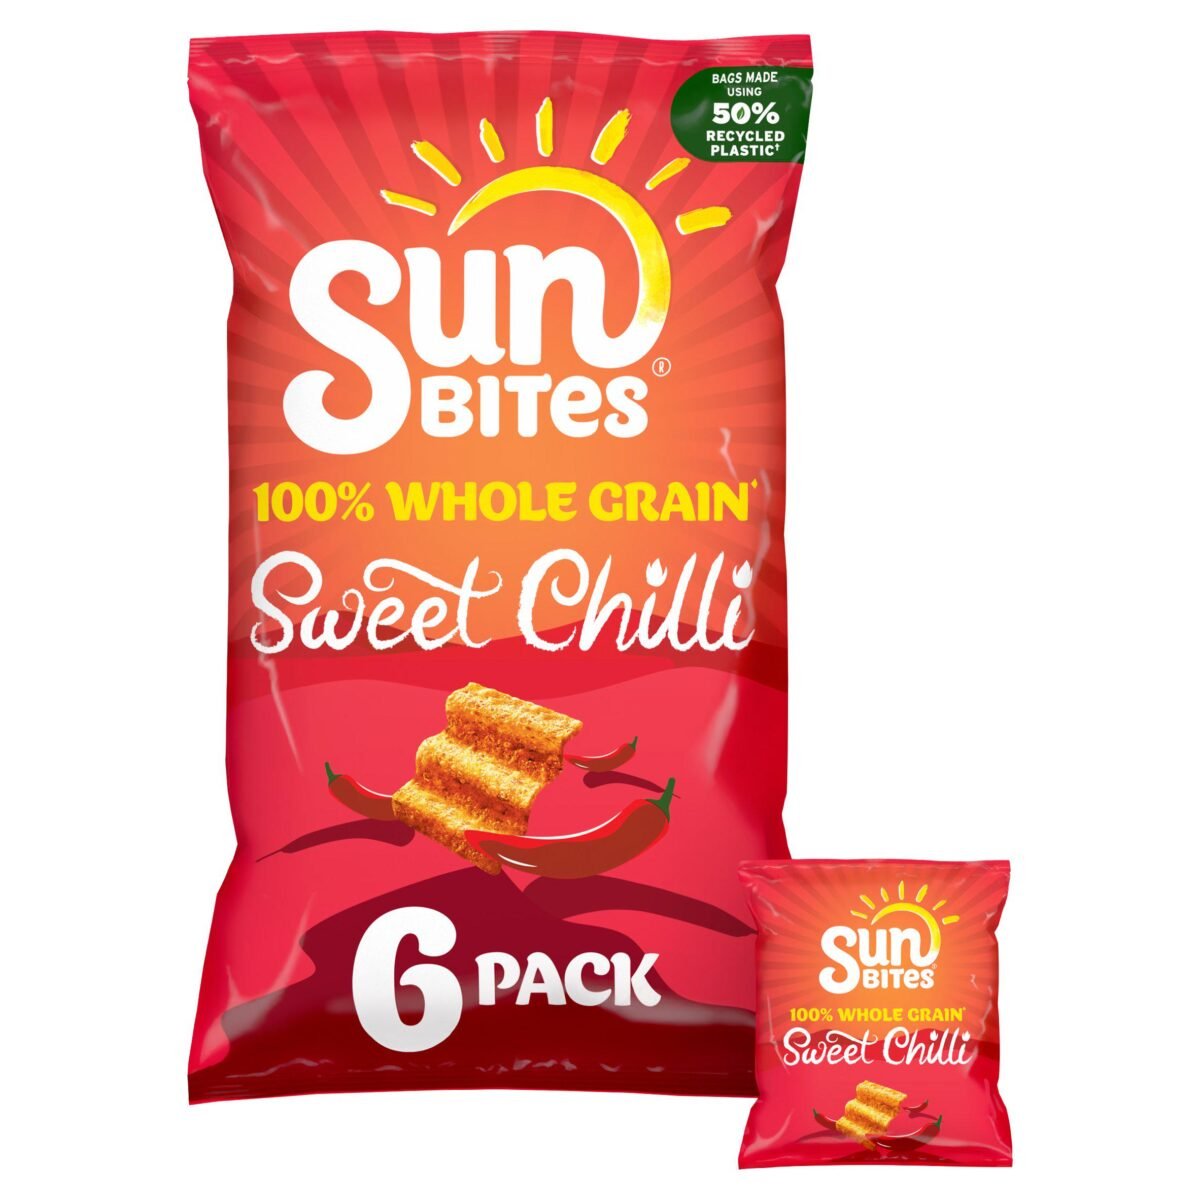 Image shows a multipack of Sun Bites Sweet Chili crisps, which are suitable for vegans.